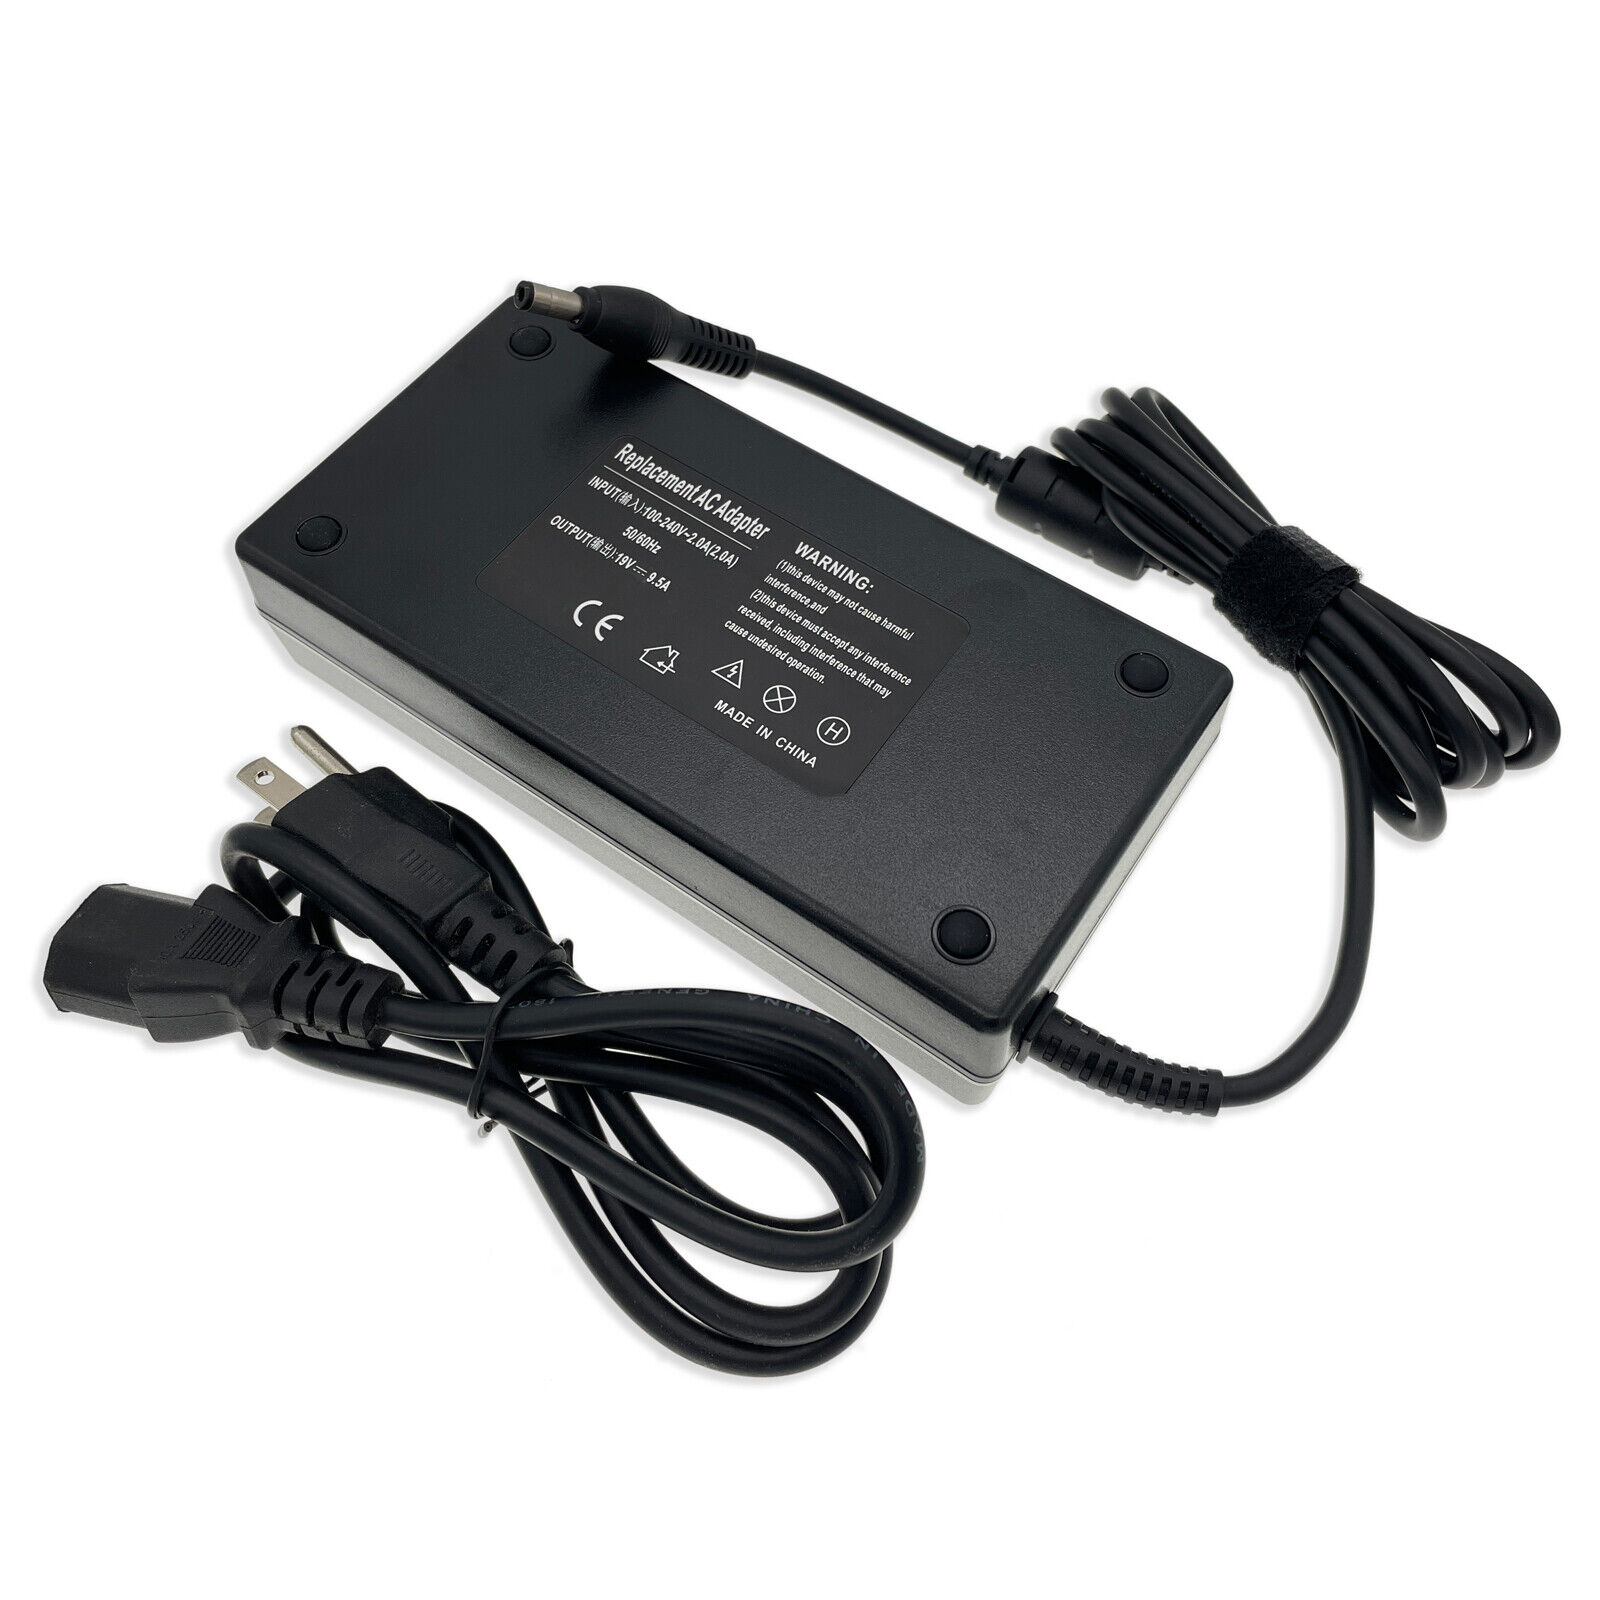 New 180W 19V AC Adapter Charger For MSI GT685 Series Laptop Power Supply Cord